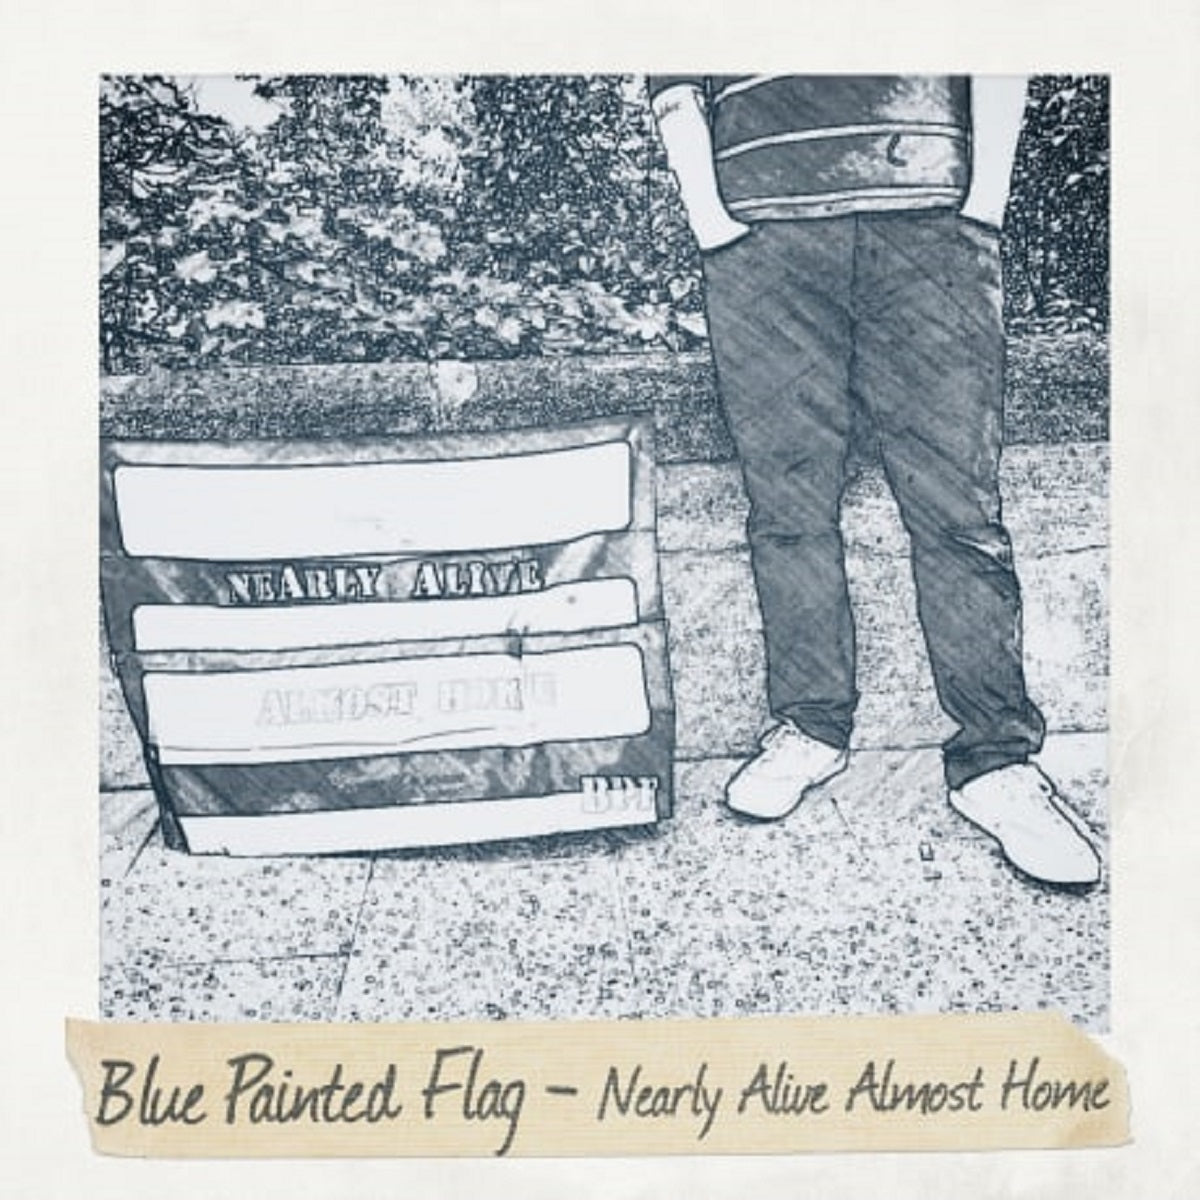 Blue Painted Flag - 'Nearly Alive, Almost Home'